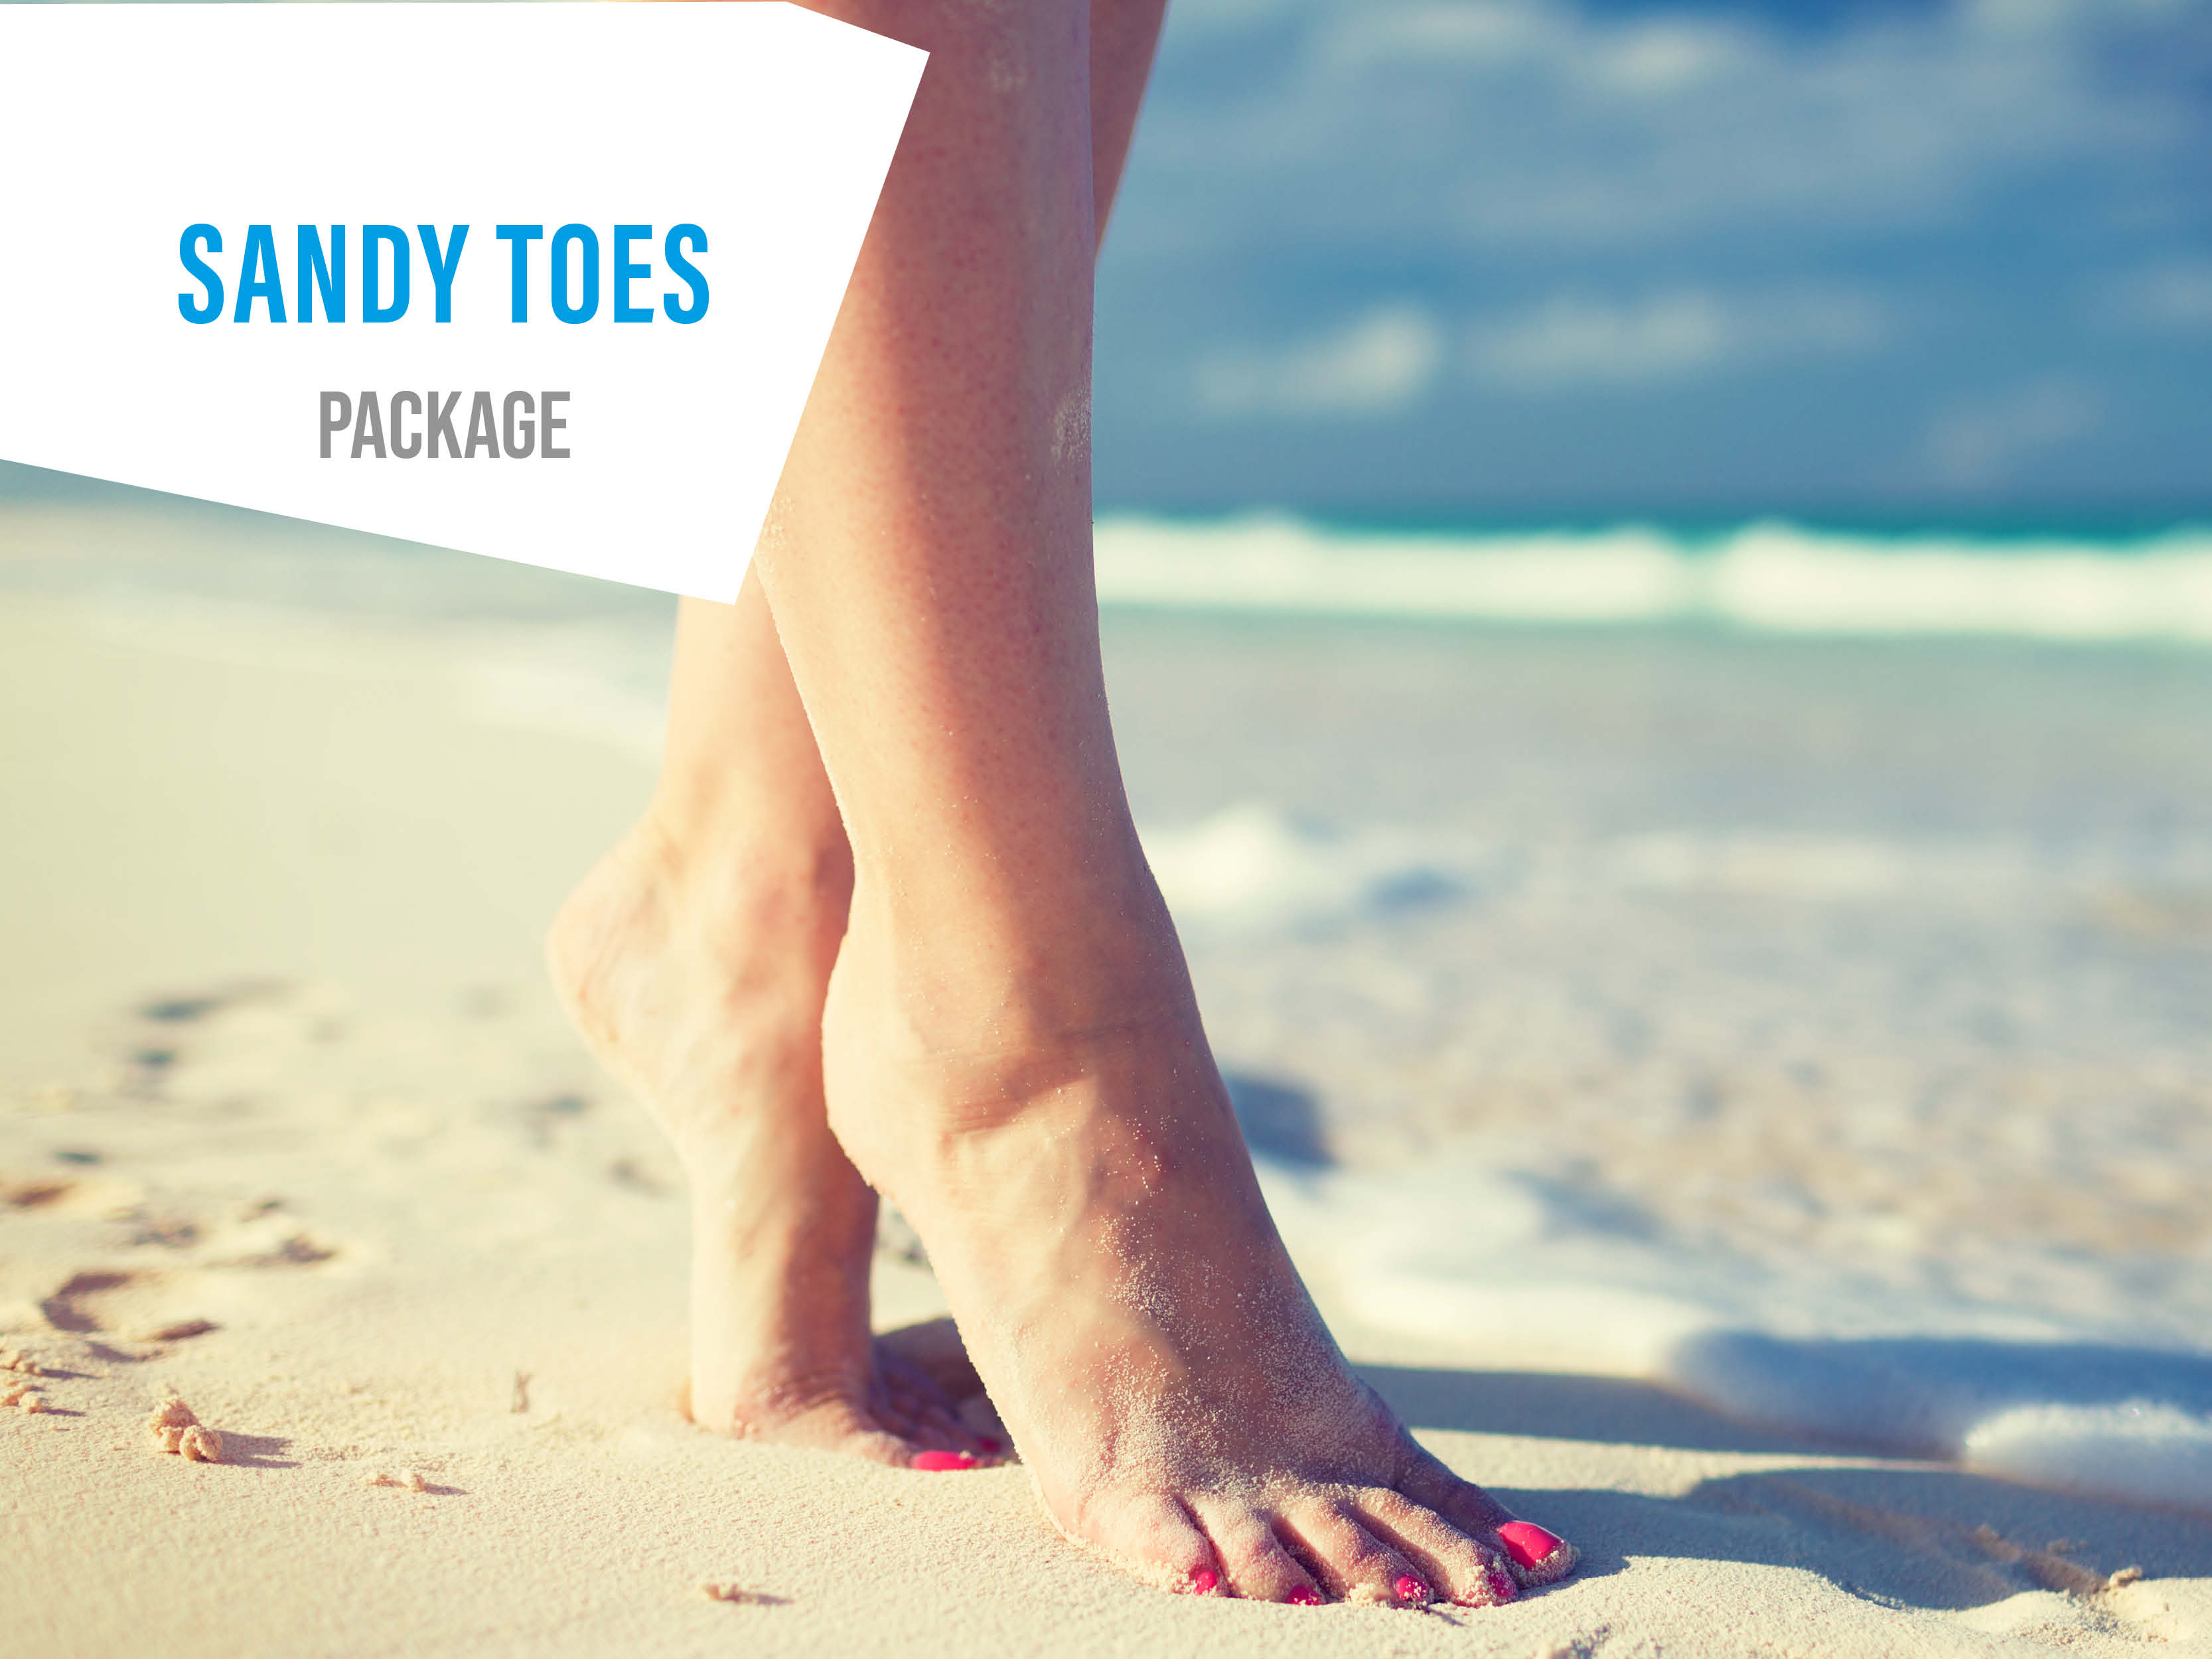 alidiza: W.i.P. Wednesday: Toes In the Sand